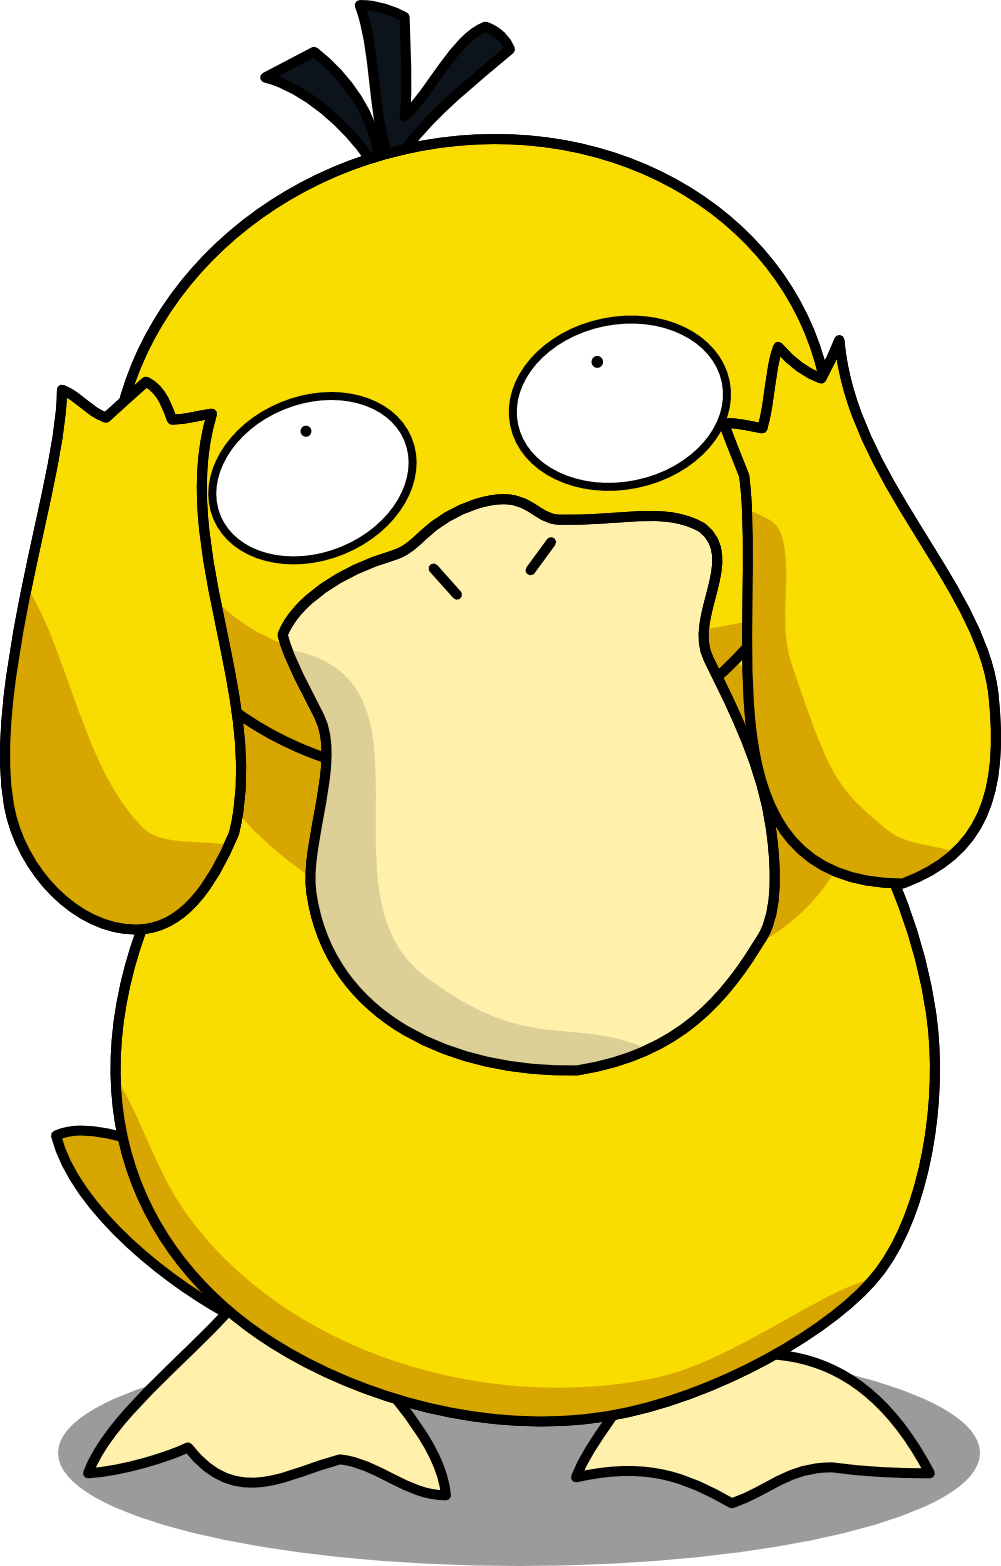 Silly Psyduck by Mighty355 on DeviantArt